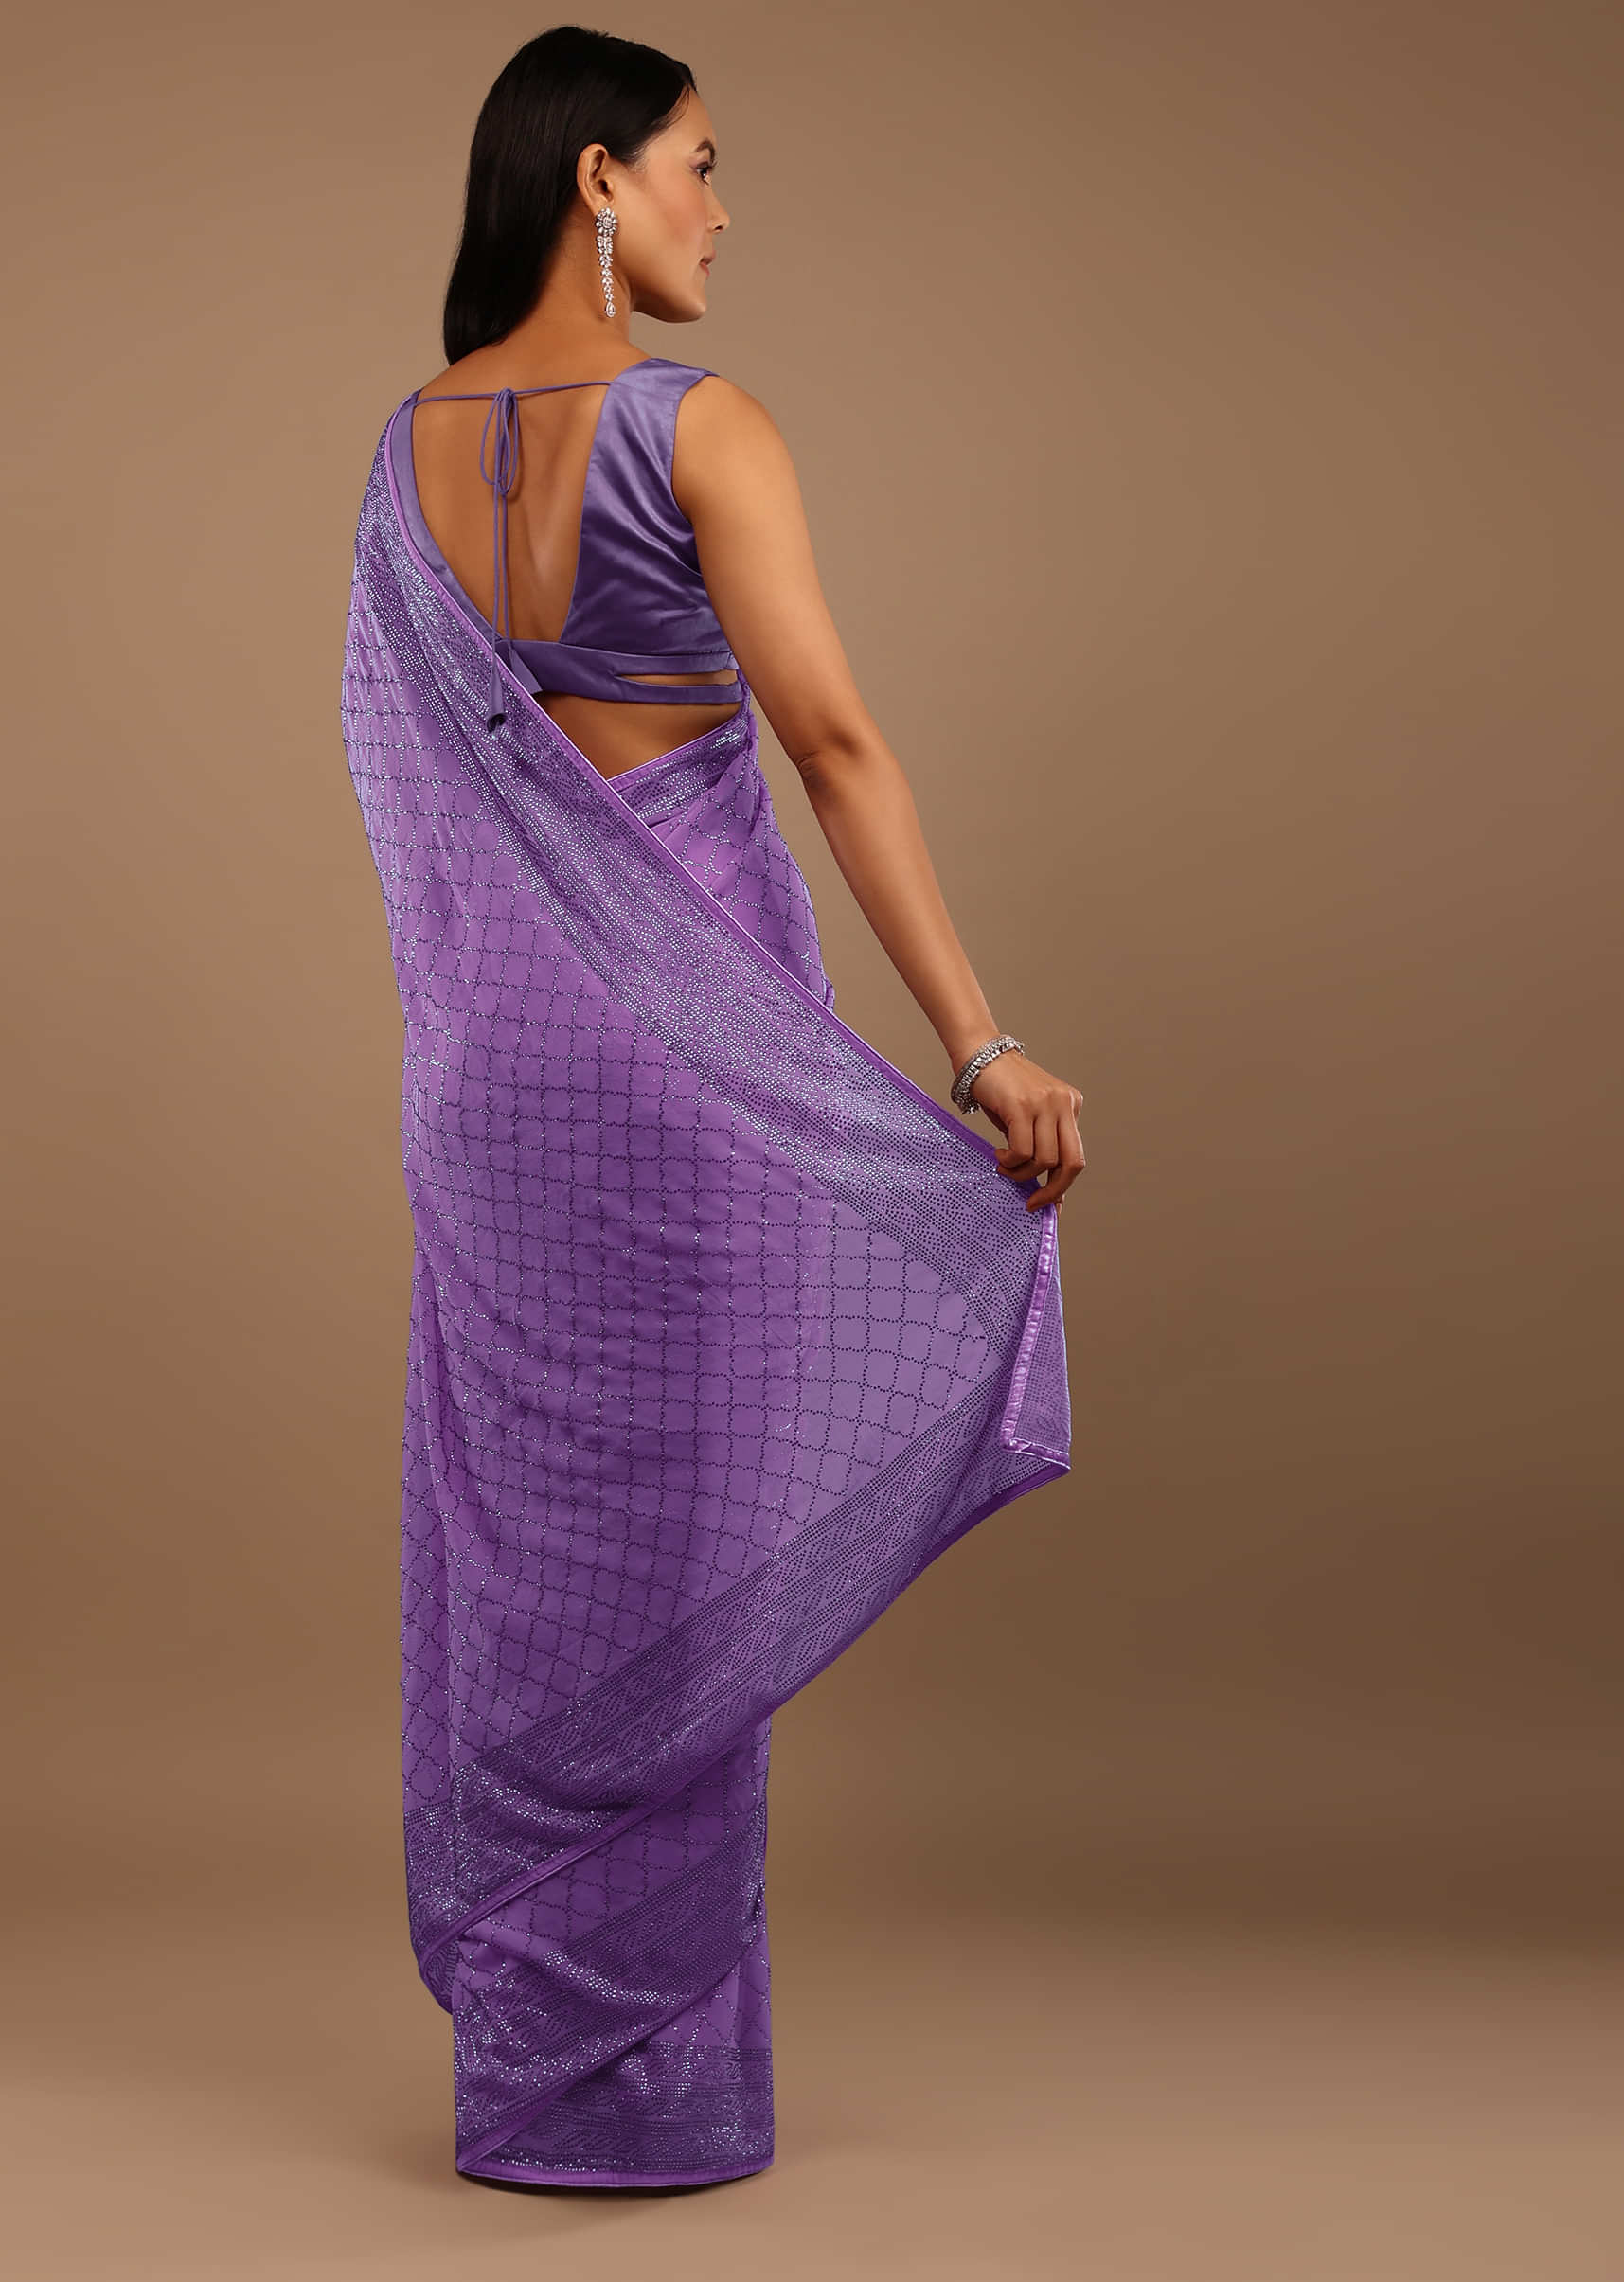 Light Purple Georgette Saree With Swarovski Stonework On The Borders And A Stonework Added Unstitched Blouse